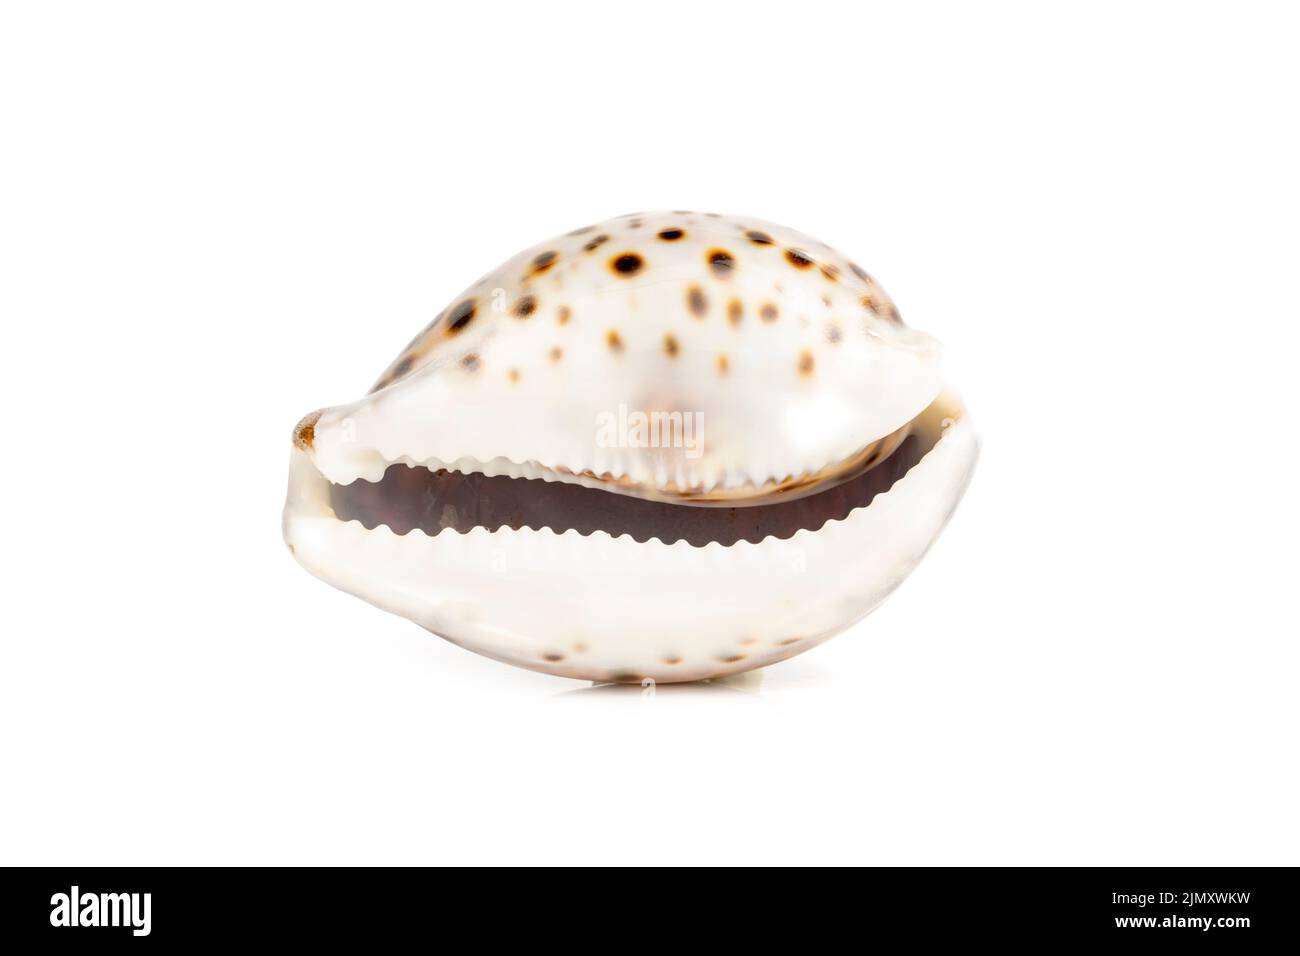 Image of tiger cowrie (Cypraea tigris) on a white background. Undersea Animals. Sea shells. Stock Photo